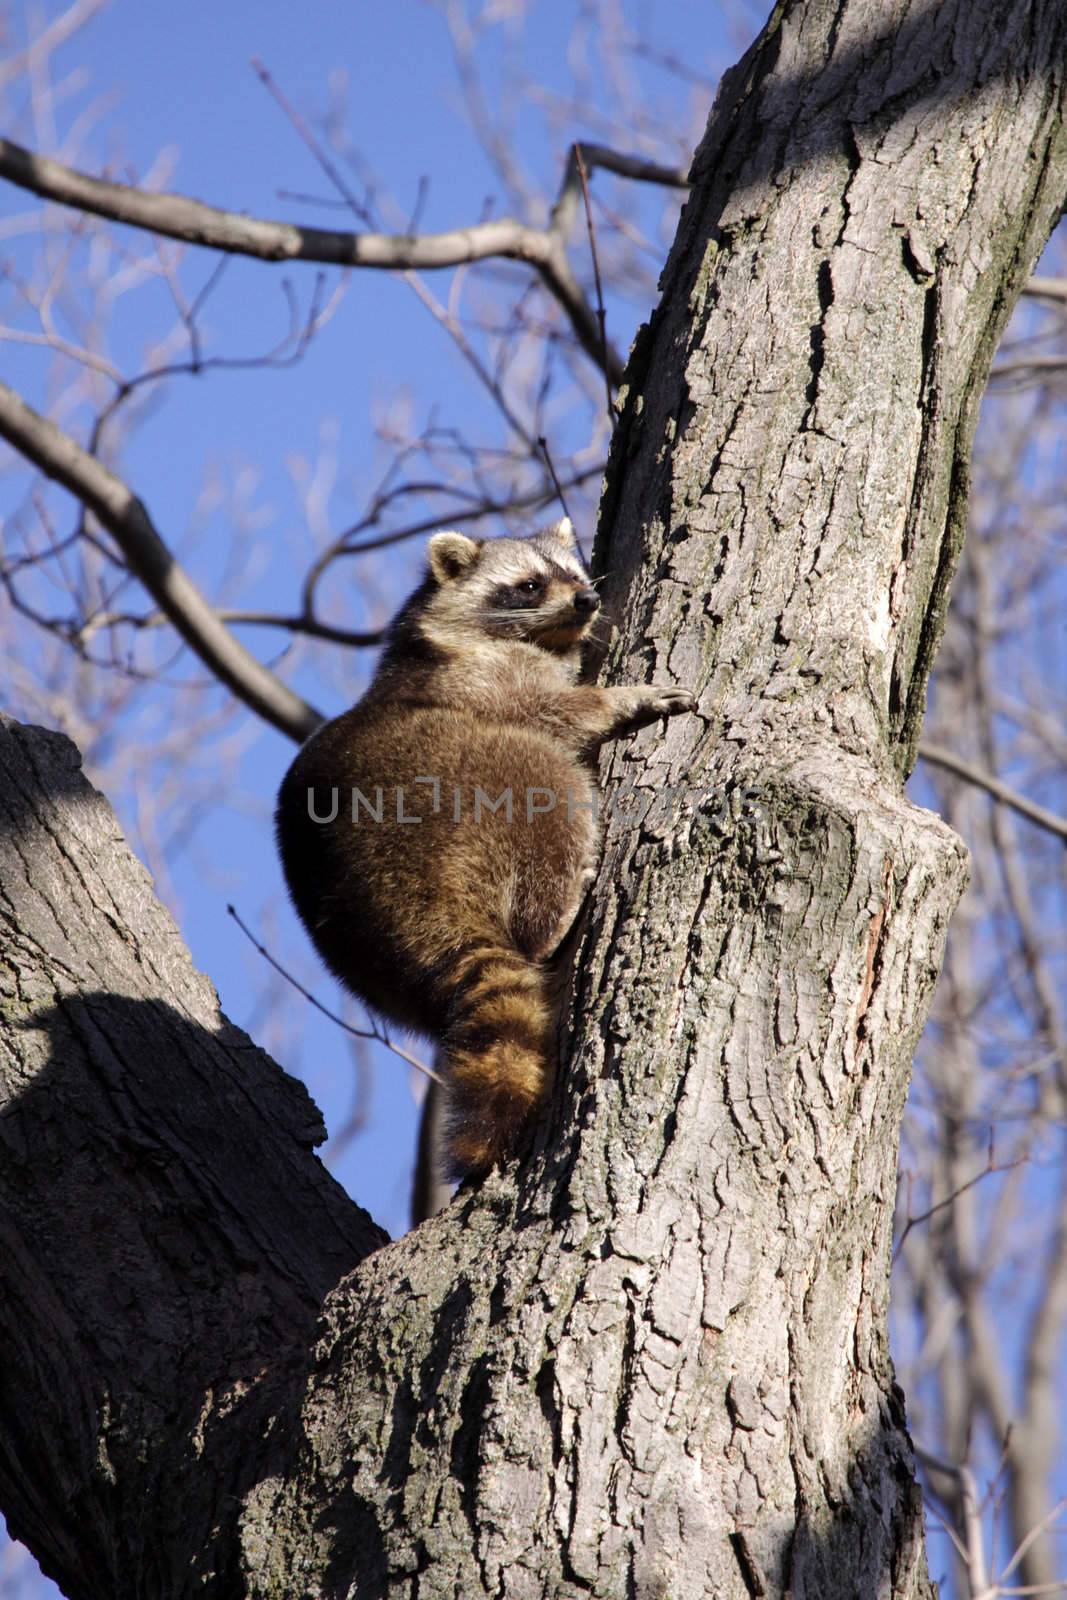 A raccoon (Procyon lotor) perched in a tree.
